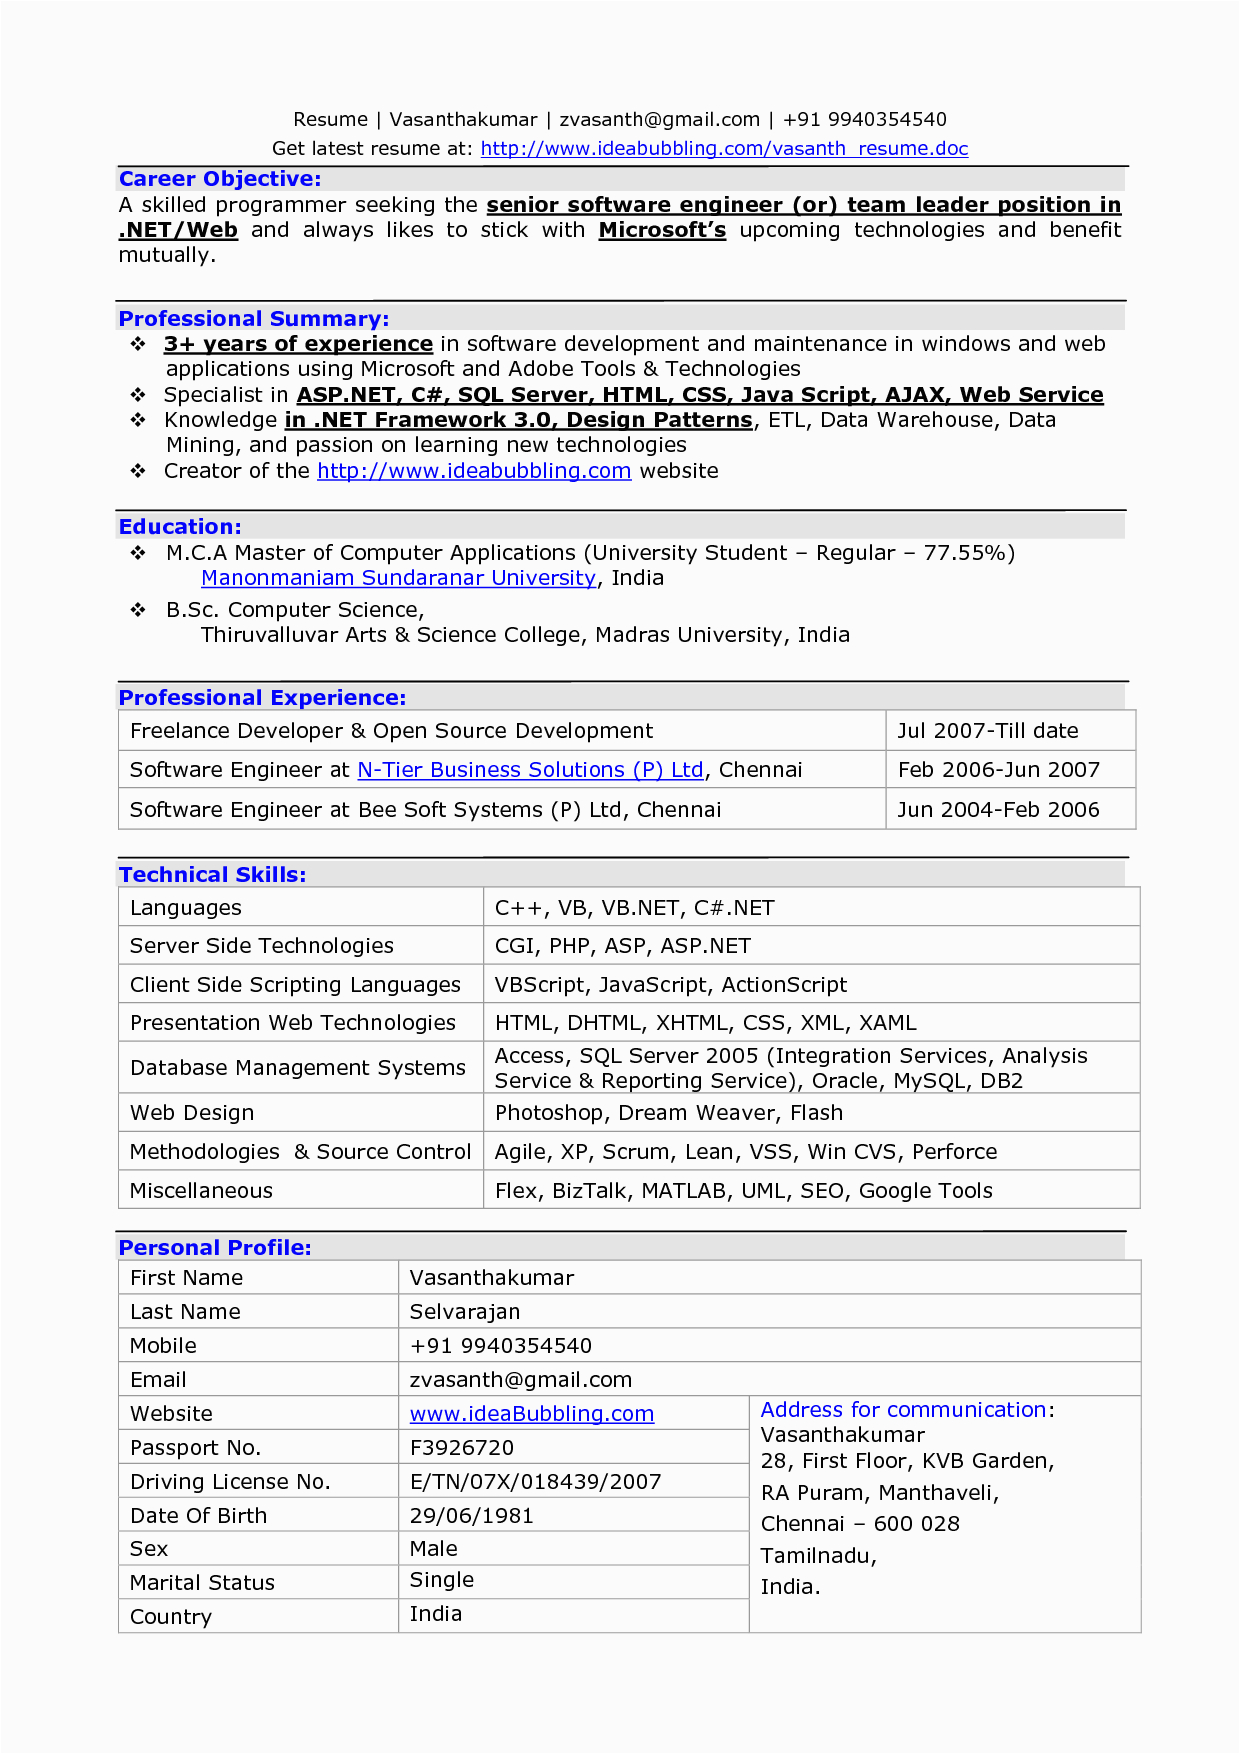 Sample Resume for Experienced software Engineer Resume Experienced software Engineer